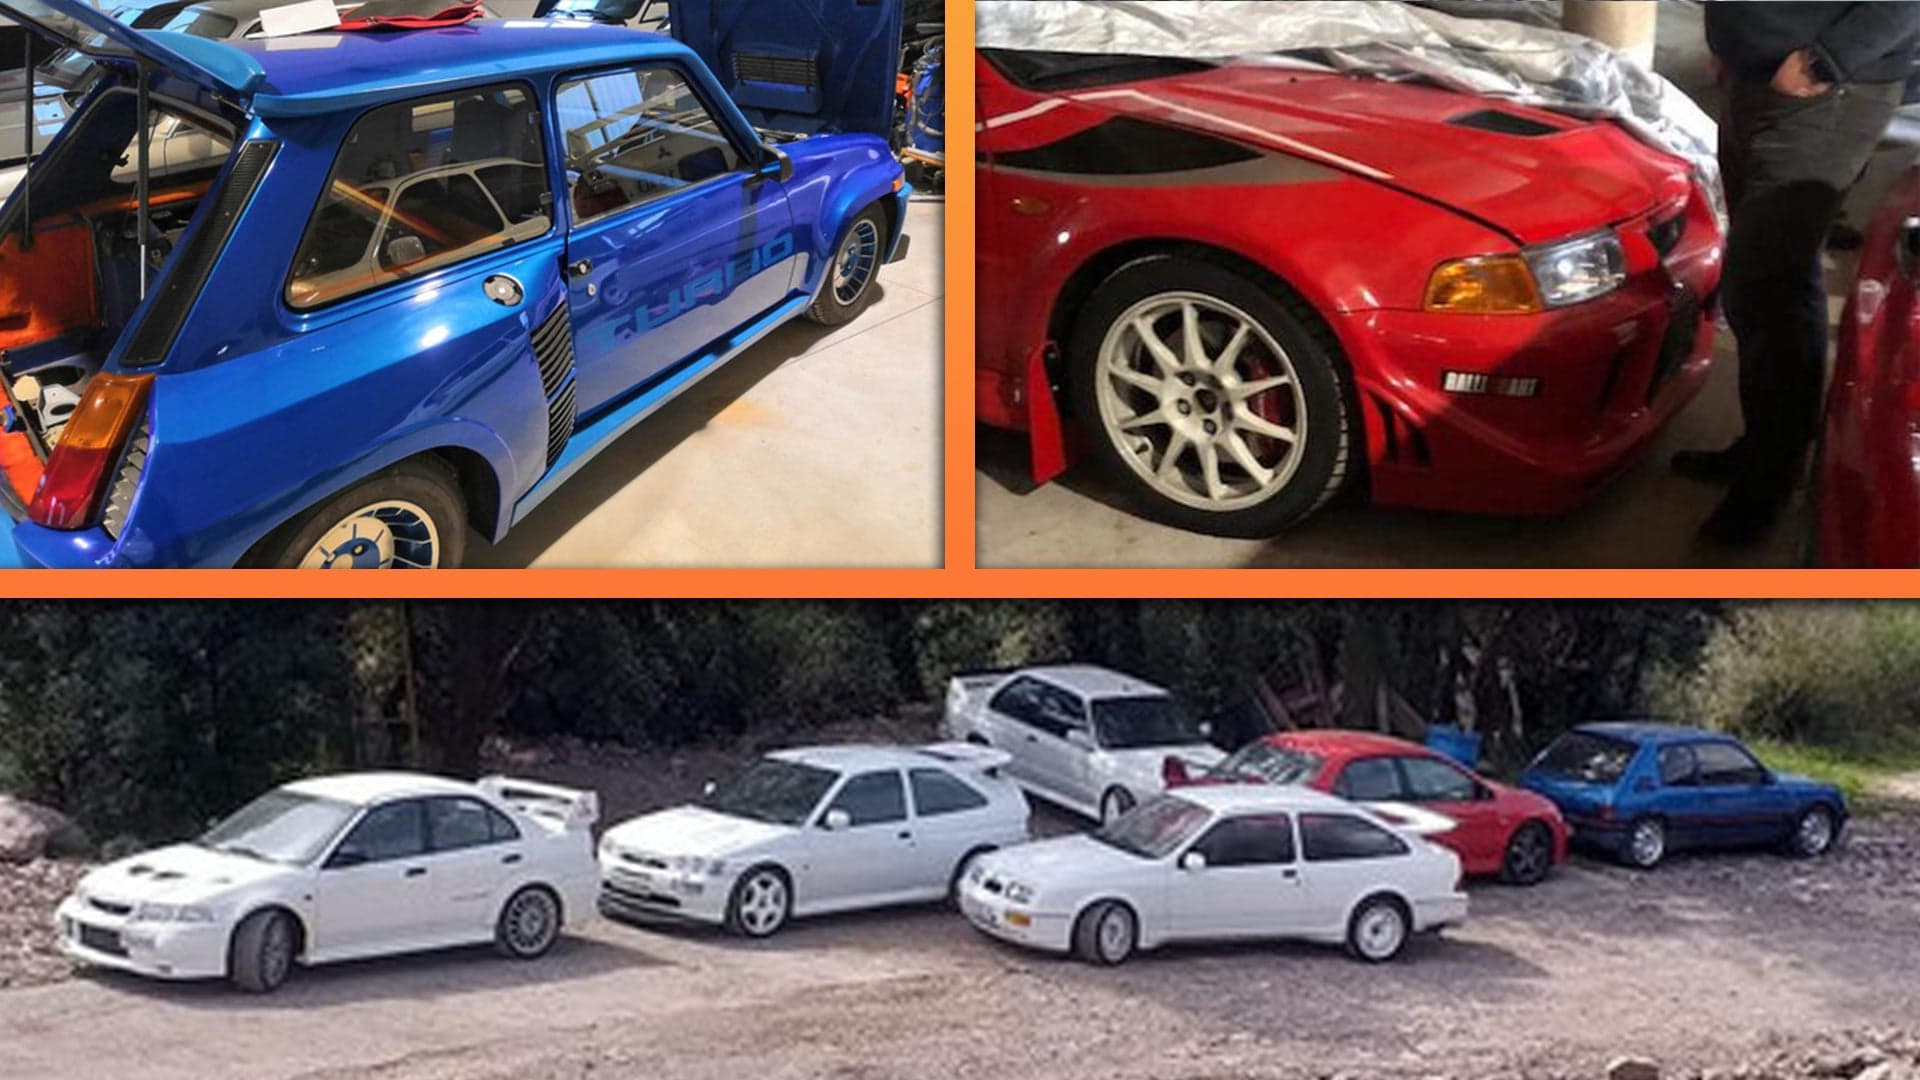 This Thief Stole All Your ’80s and ’90s Dream Cars: M3s, Evos, Cosworths, a Delta Integrale and More